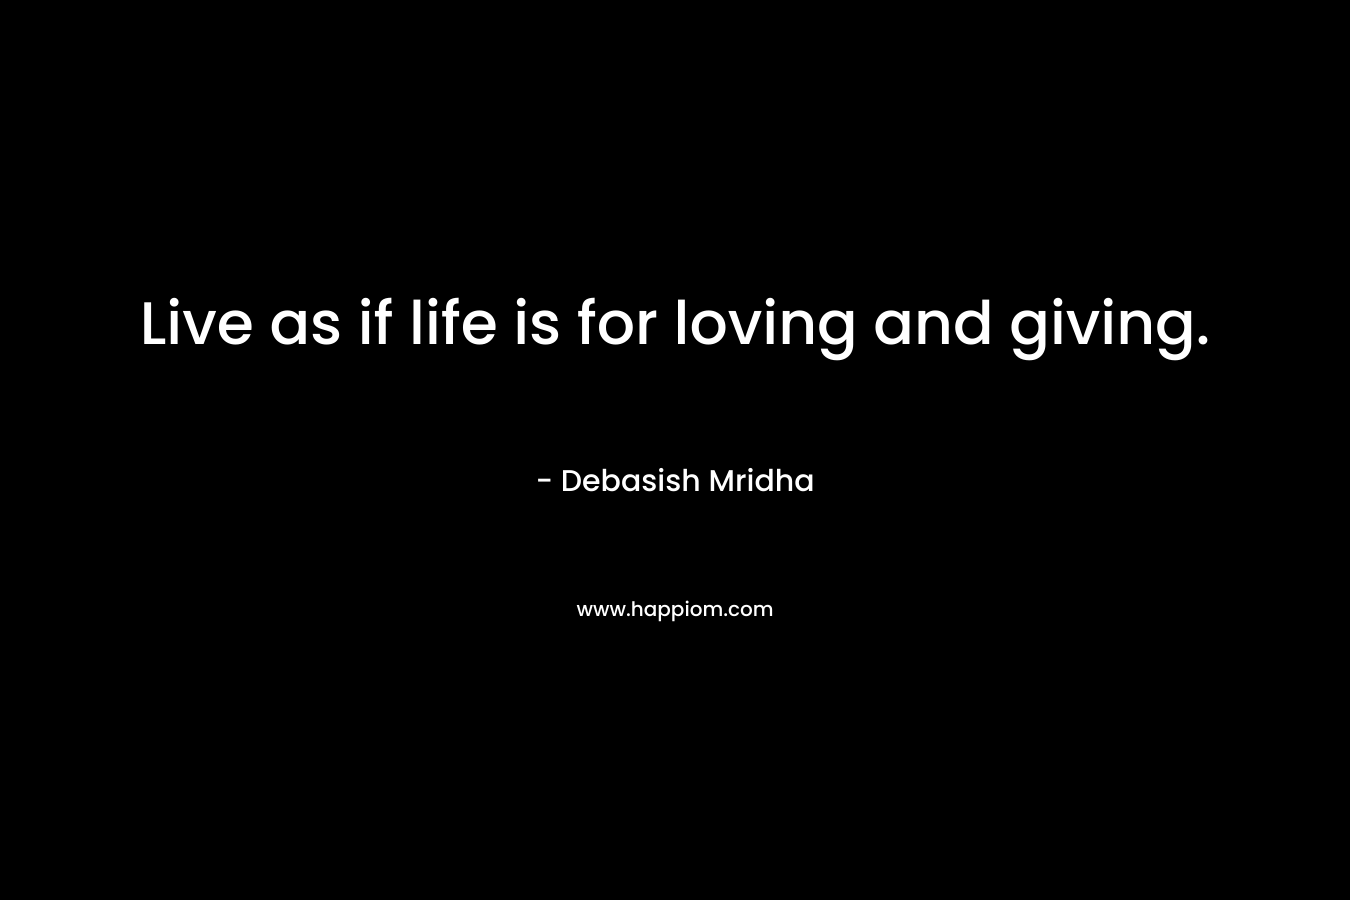 Live as if life is for loving and giving.